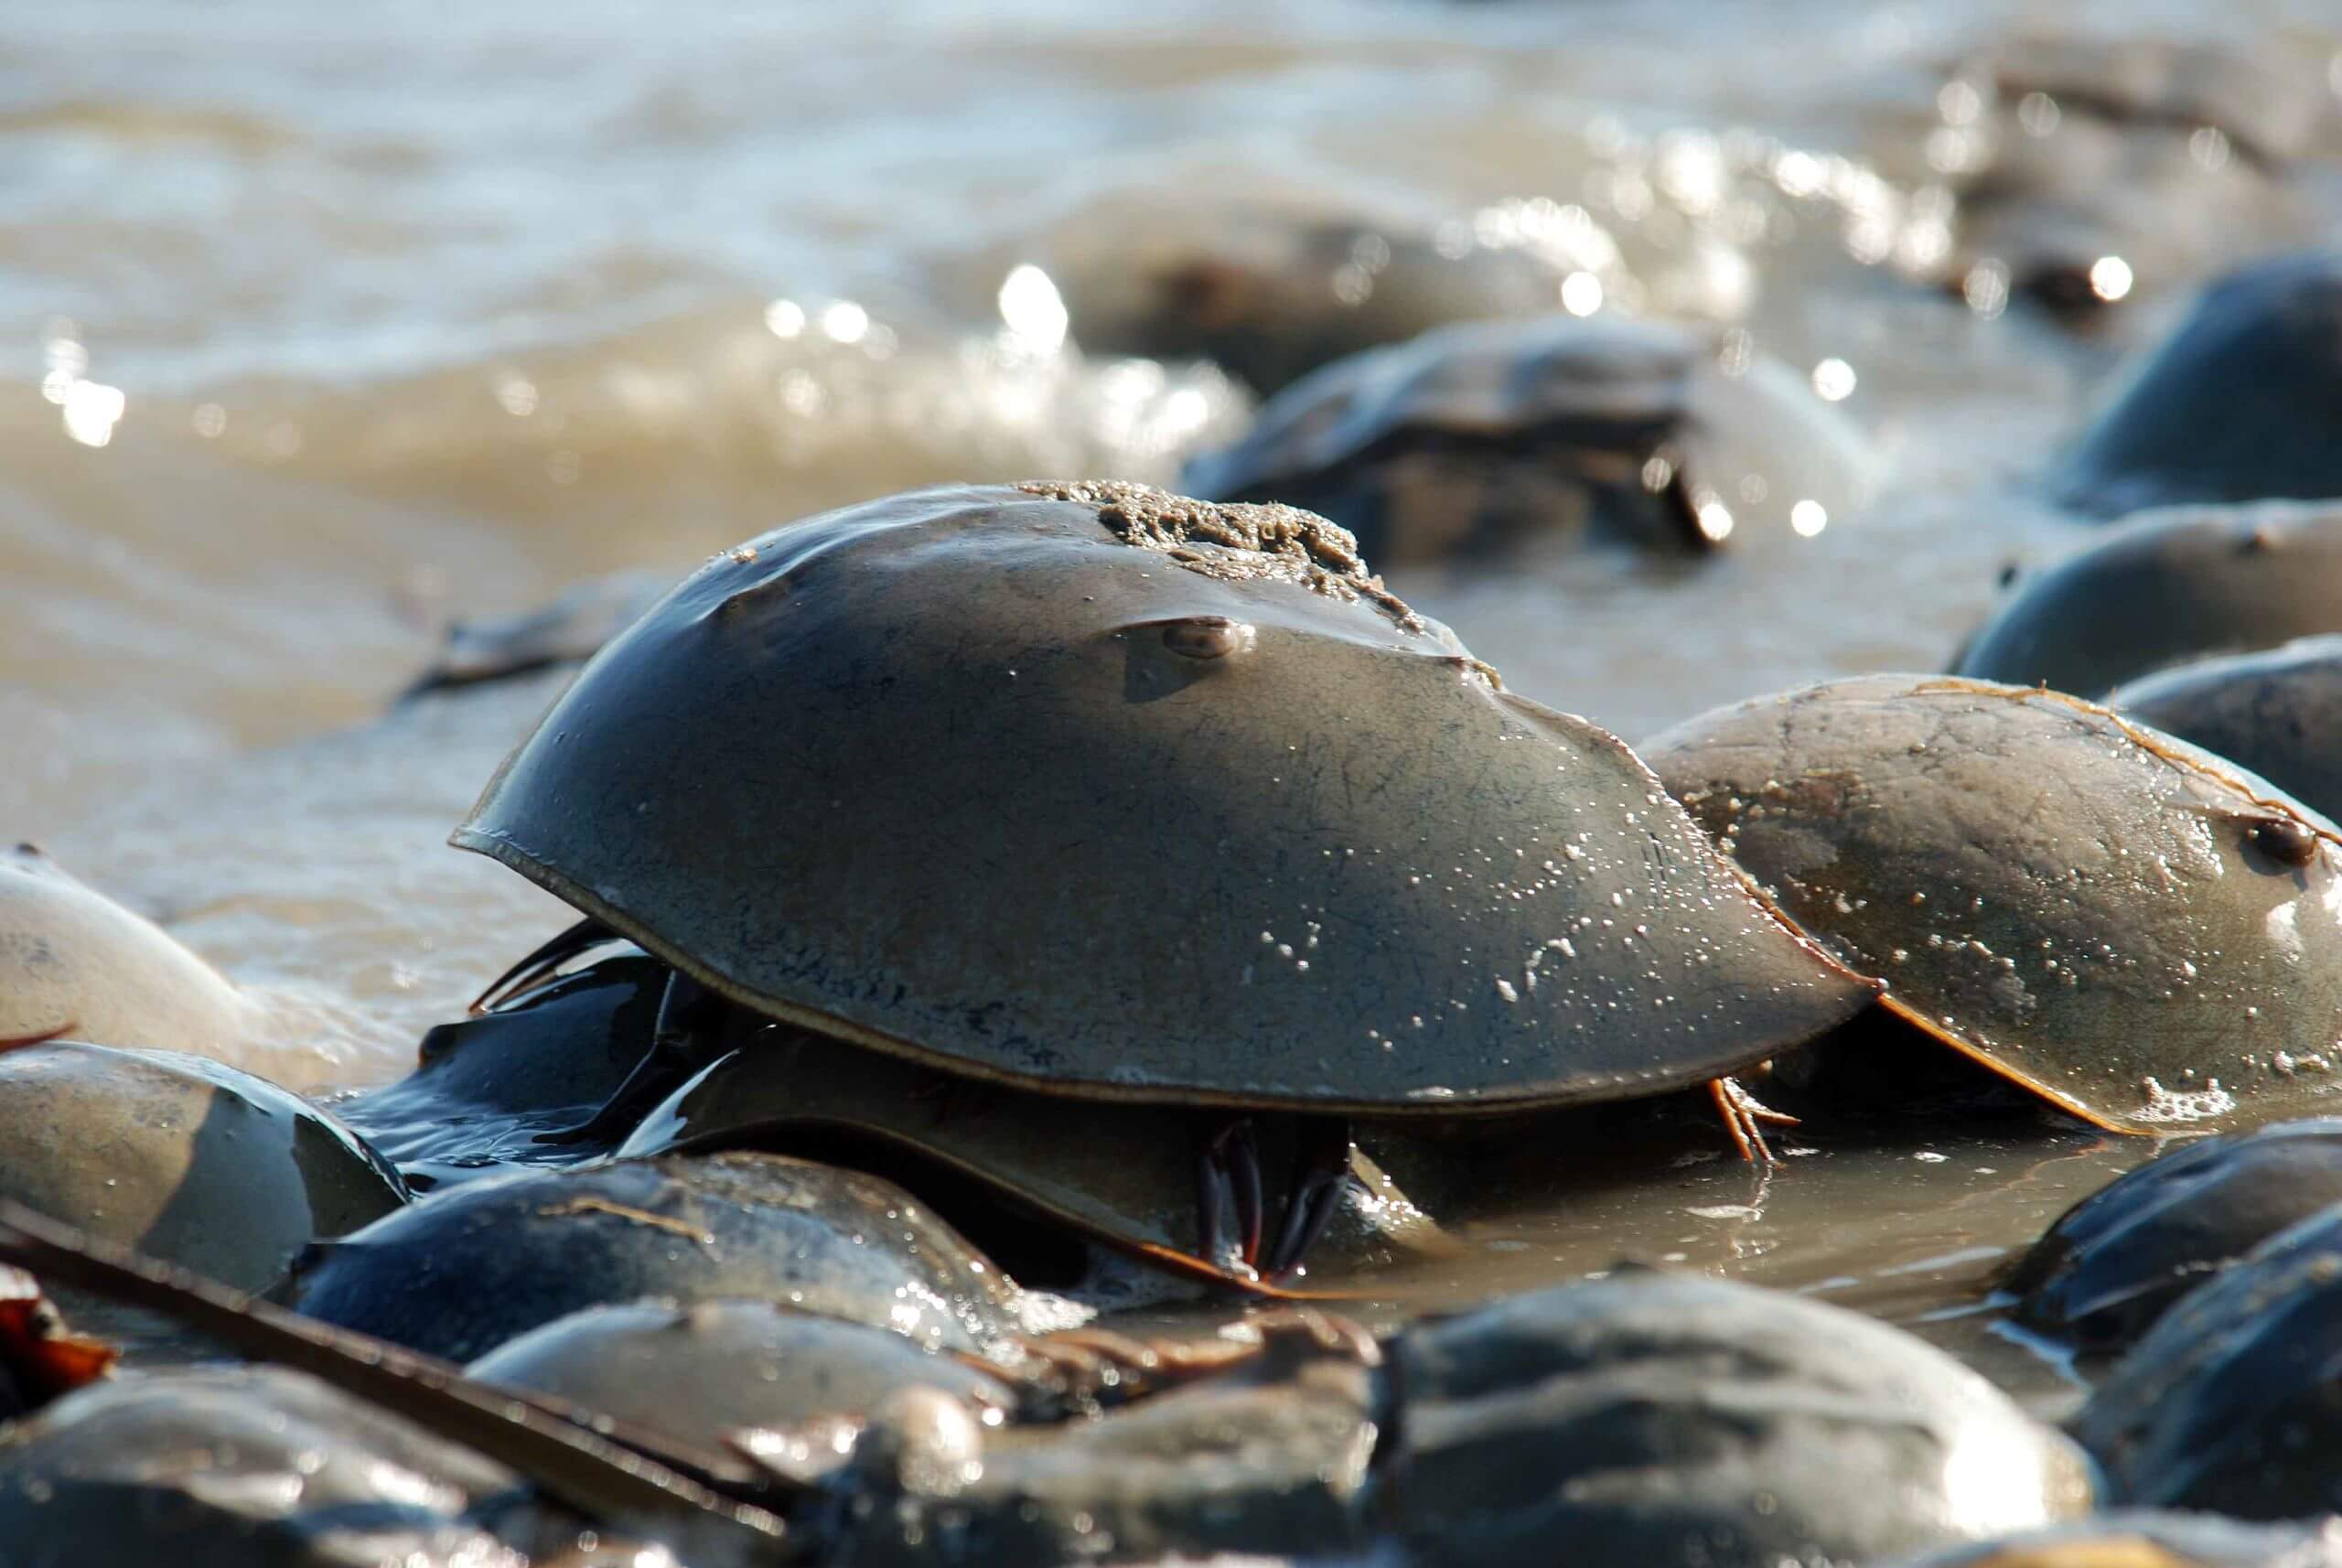 The breeding time for horseshoe crabs is May-June. If found upside down onshore